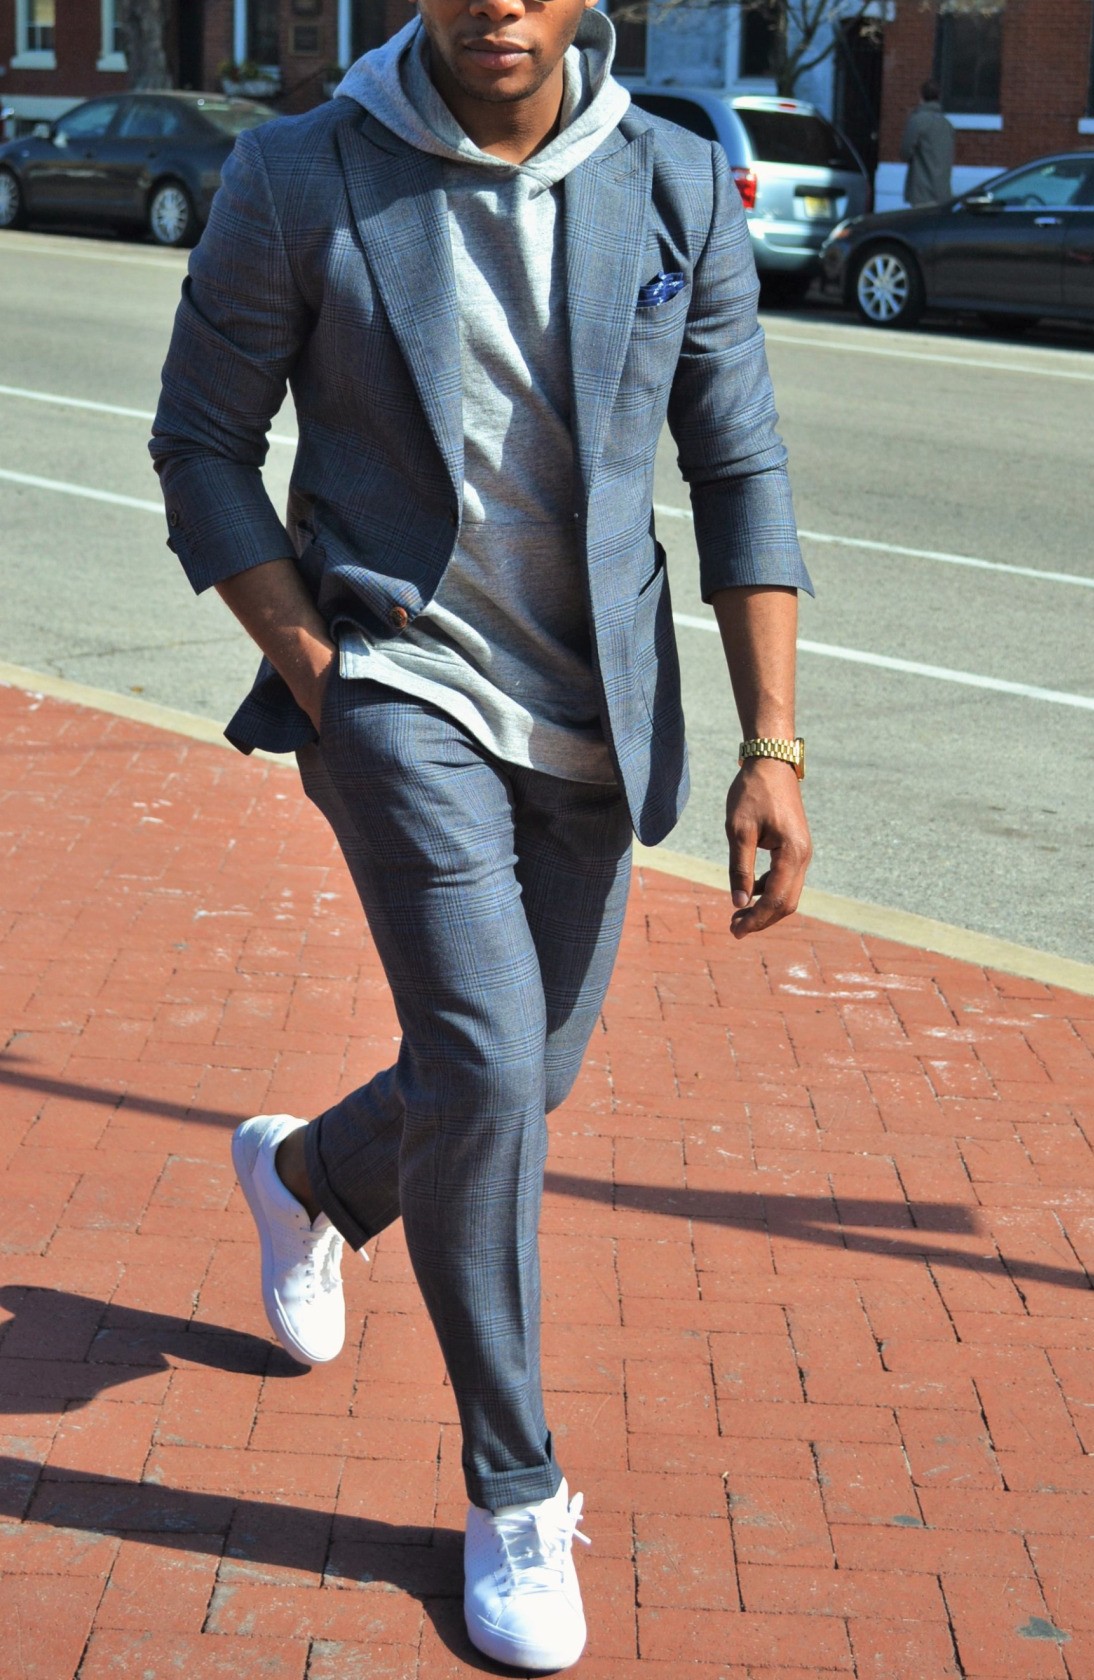 hoodie under suit with white trainers